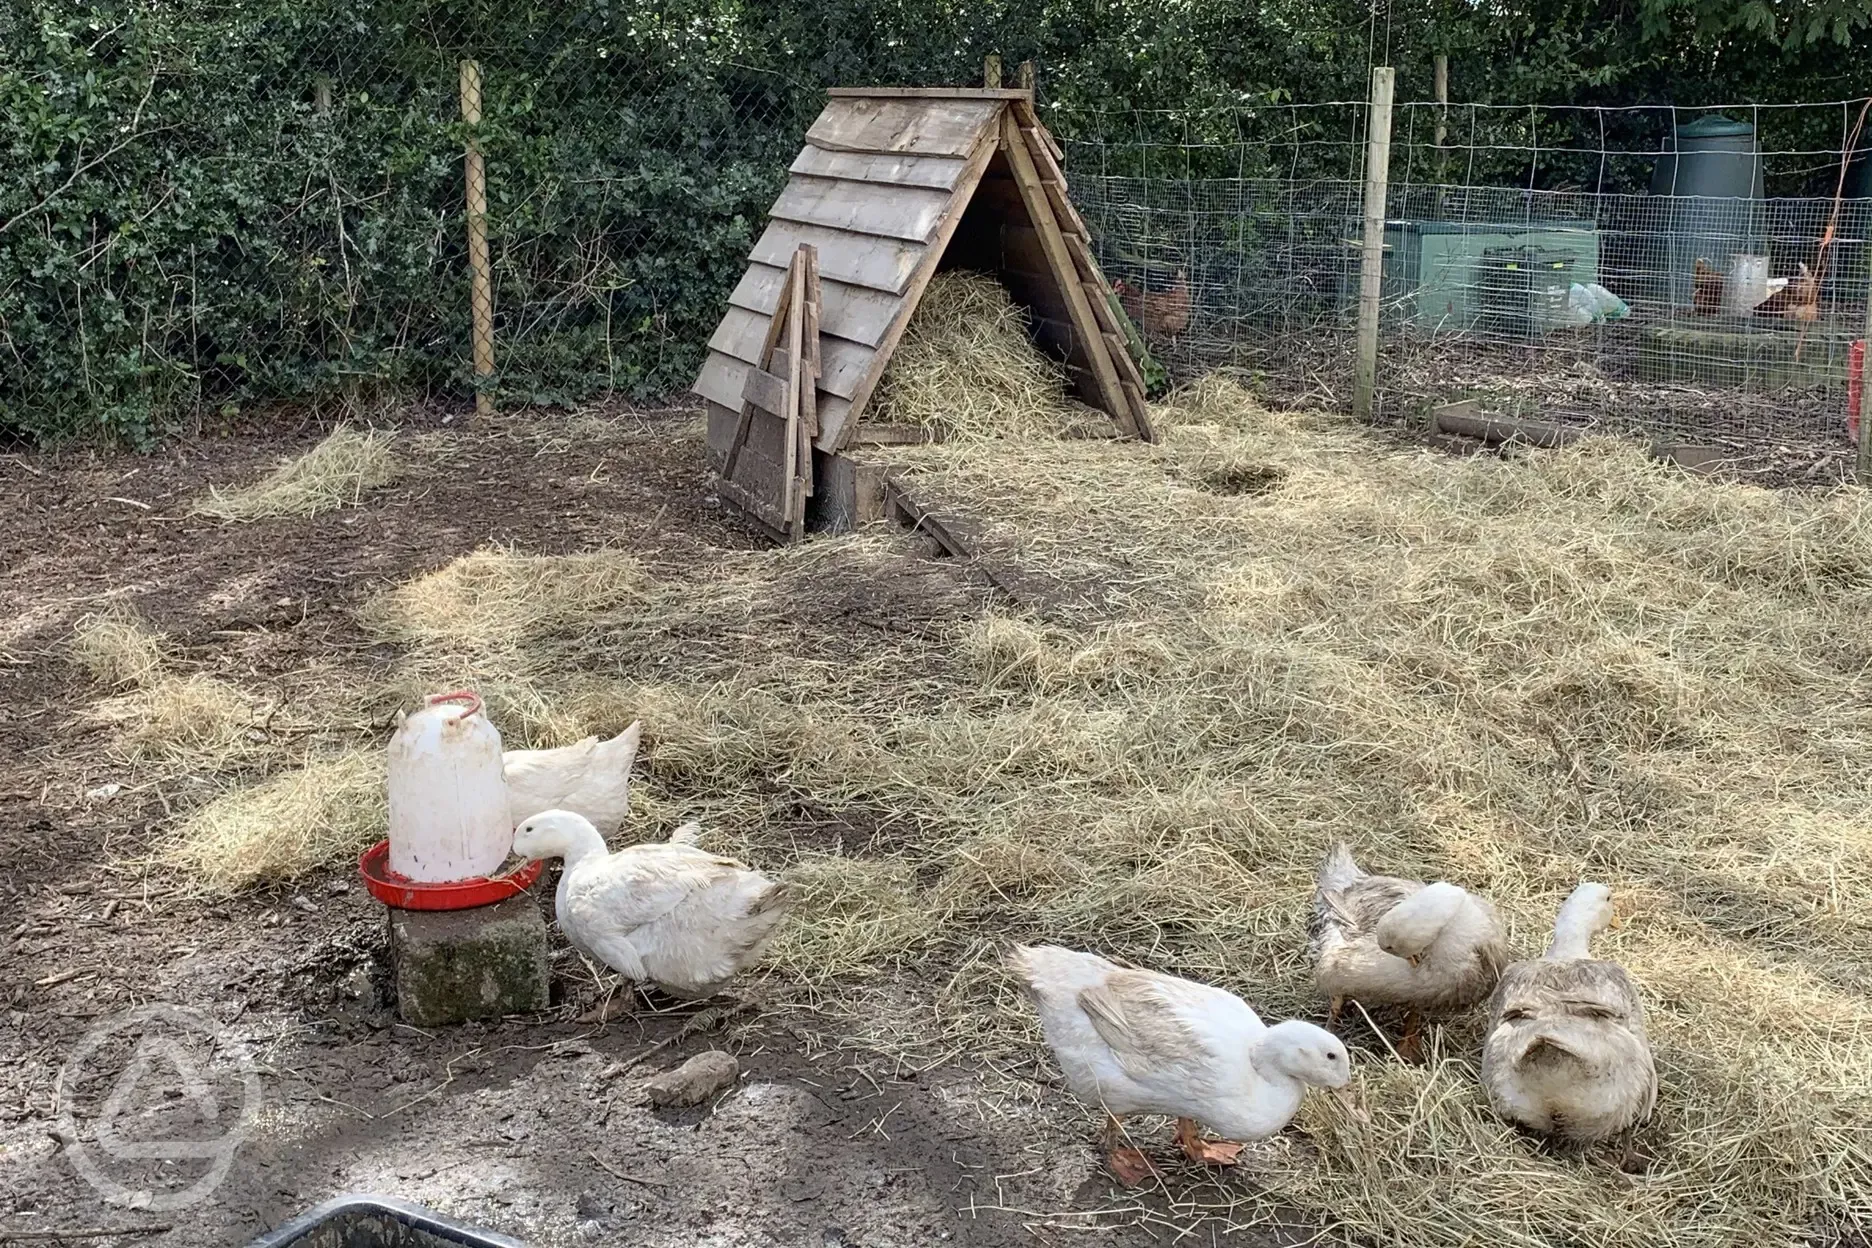 Ducks and chickens on site. FRESH EGGS